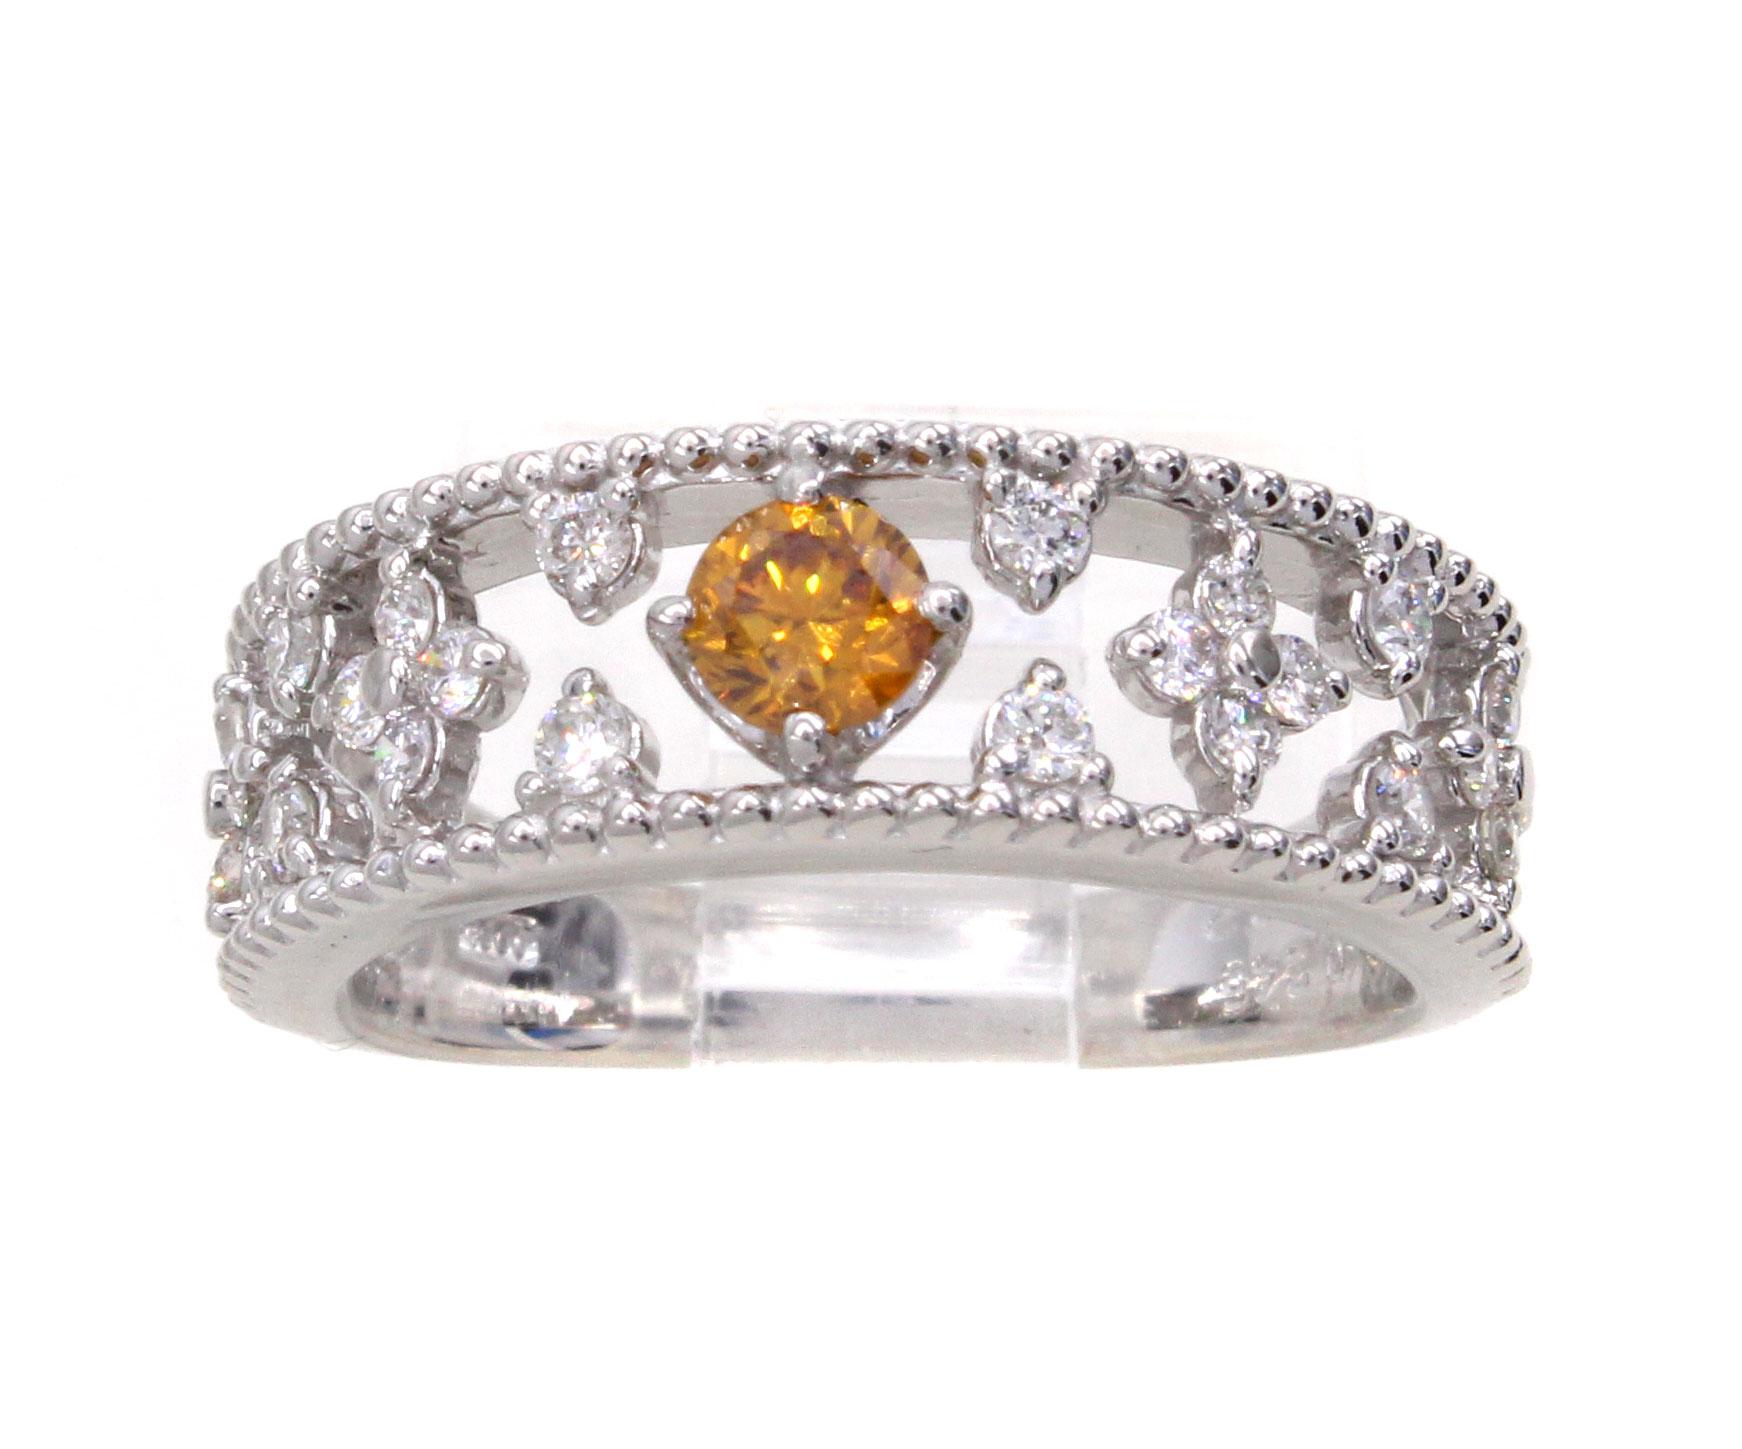 A vibrant bright orange brilliant cut diamond weighing 0.24 carats is the center piece of this lovely platinum eternity band. Accompanied by a report from the GIA the color is graded as natural fancy deep yellow-orange. The extremely well